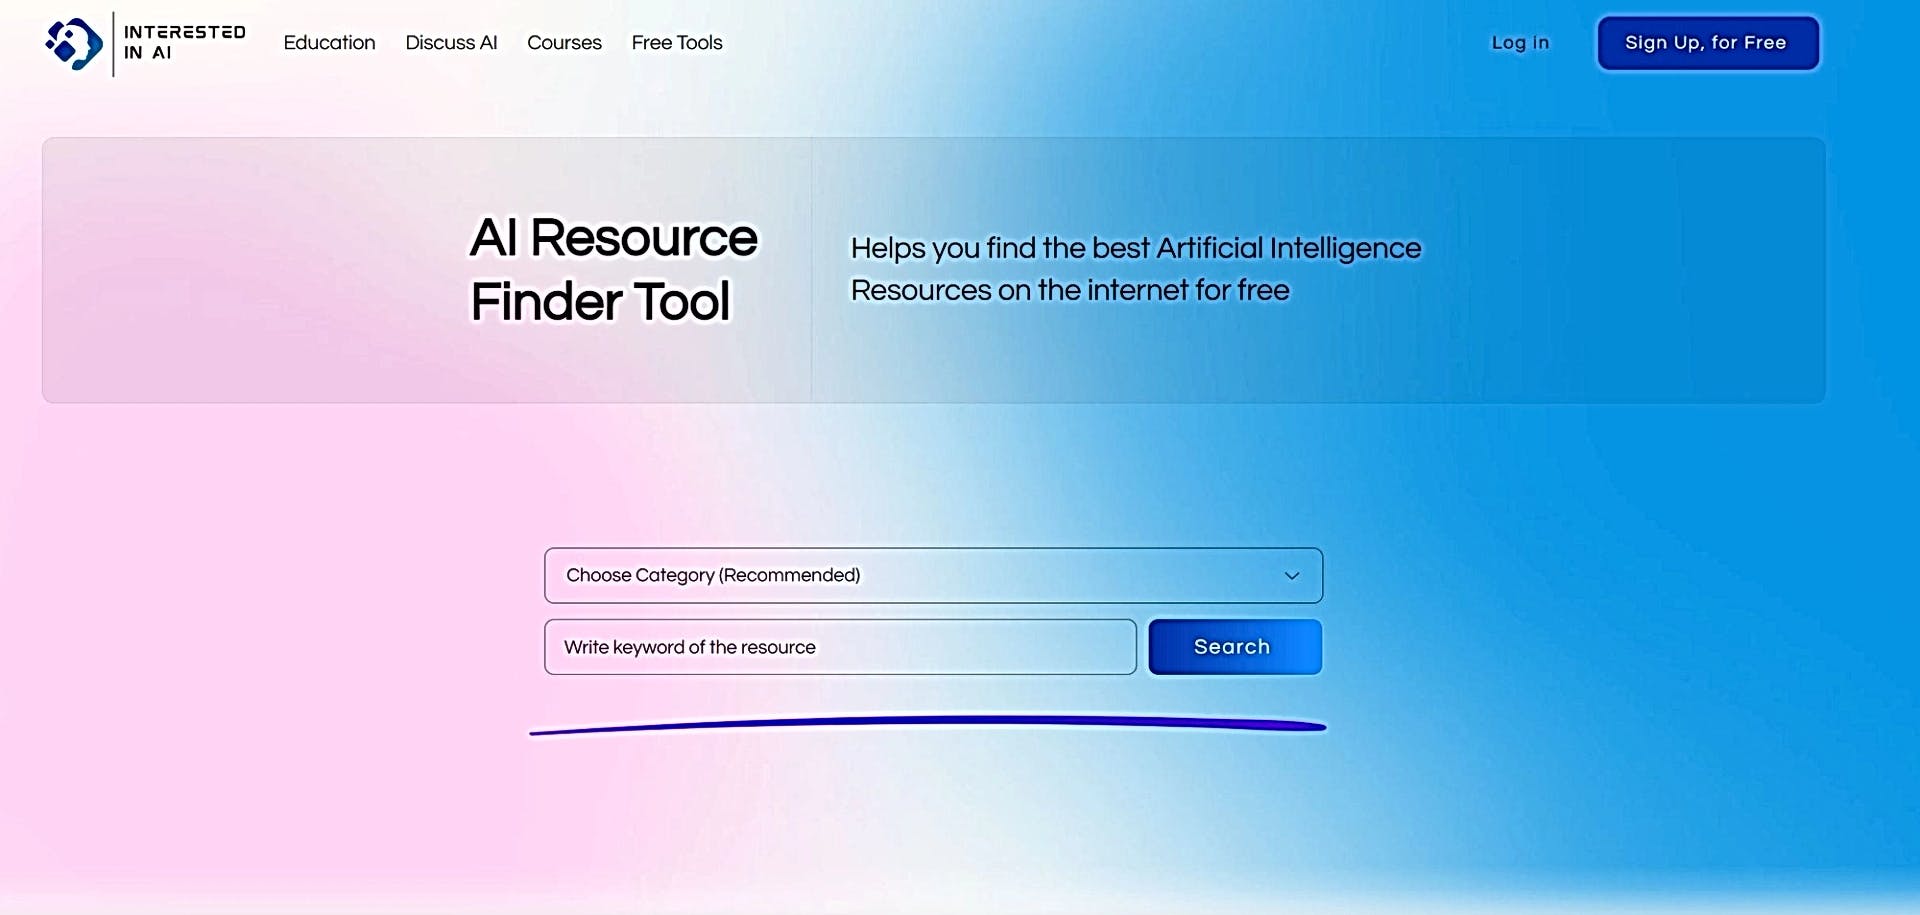 AI Resource Finder Tool featured